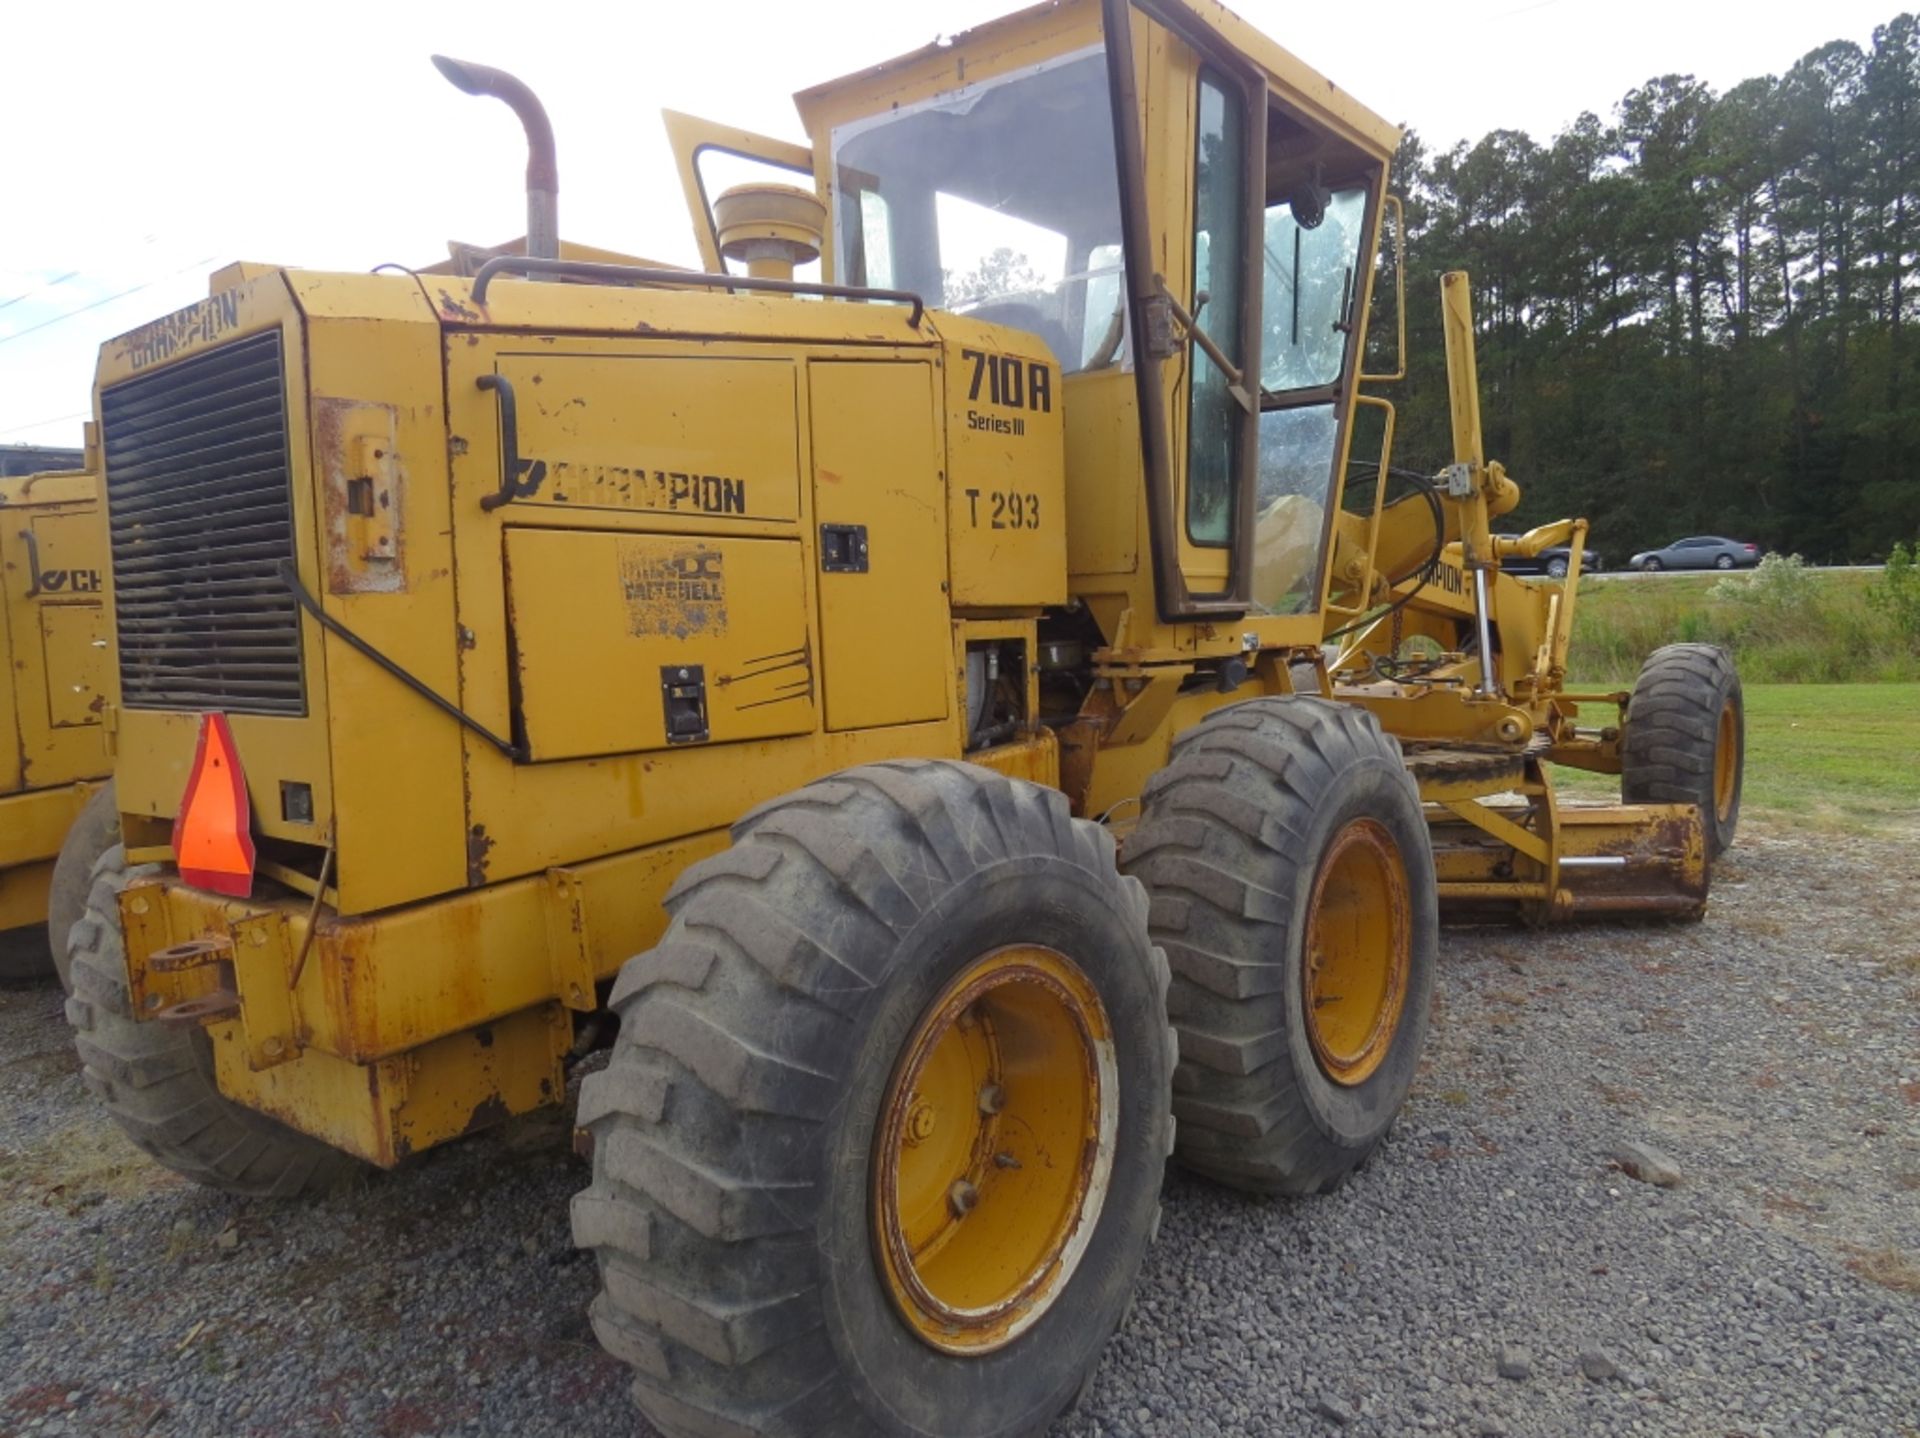 Champion 710A Series 3 Motorgrader 12' Mold Board SCARFIRE 710A-157-1136-21494 5863 hrs showing - Image 3 of 11